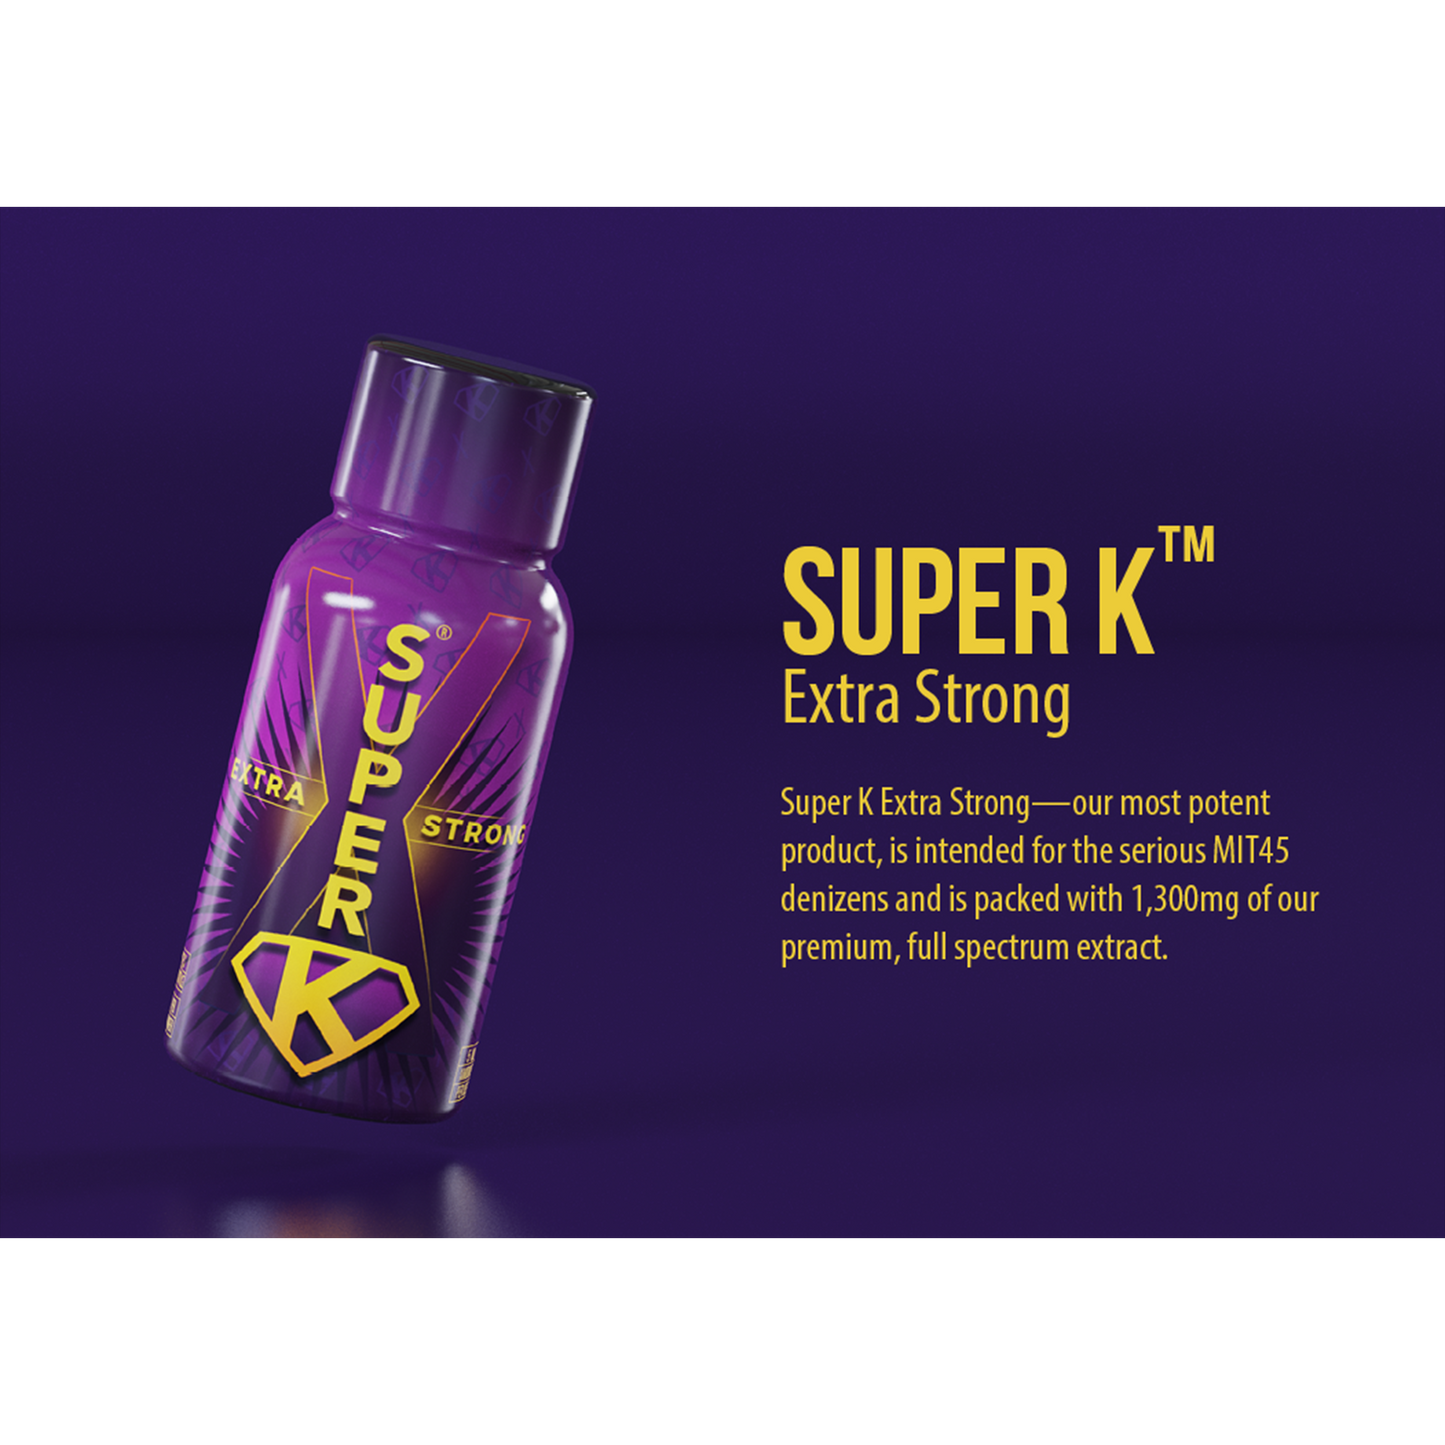 Super K Extra Strong-12 Pack DIsplay